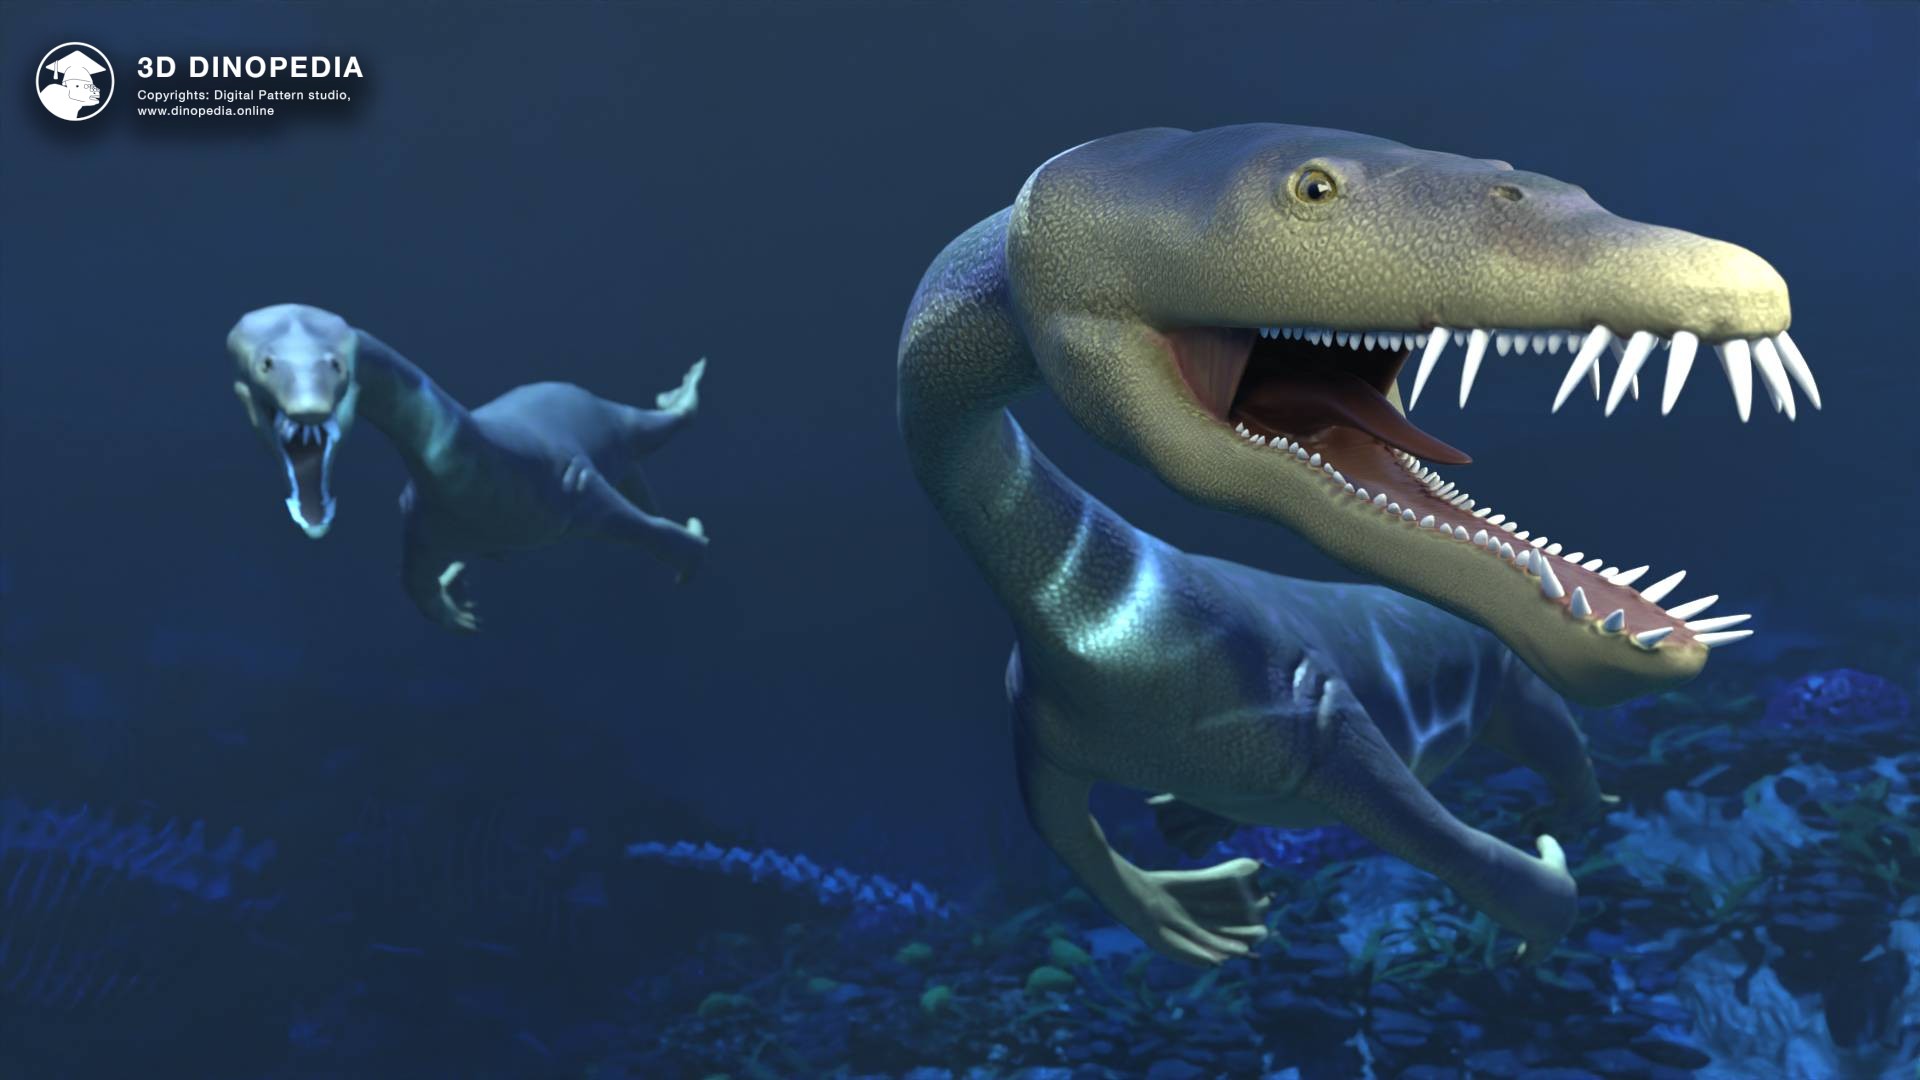 3D Dinopedia Nothosaurs, Plesiosaurs, and the Mystery of the Long Neck